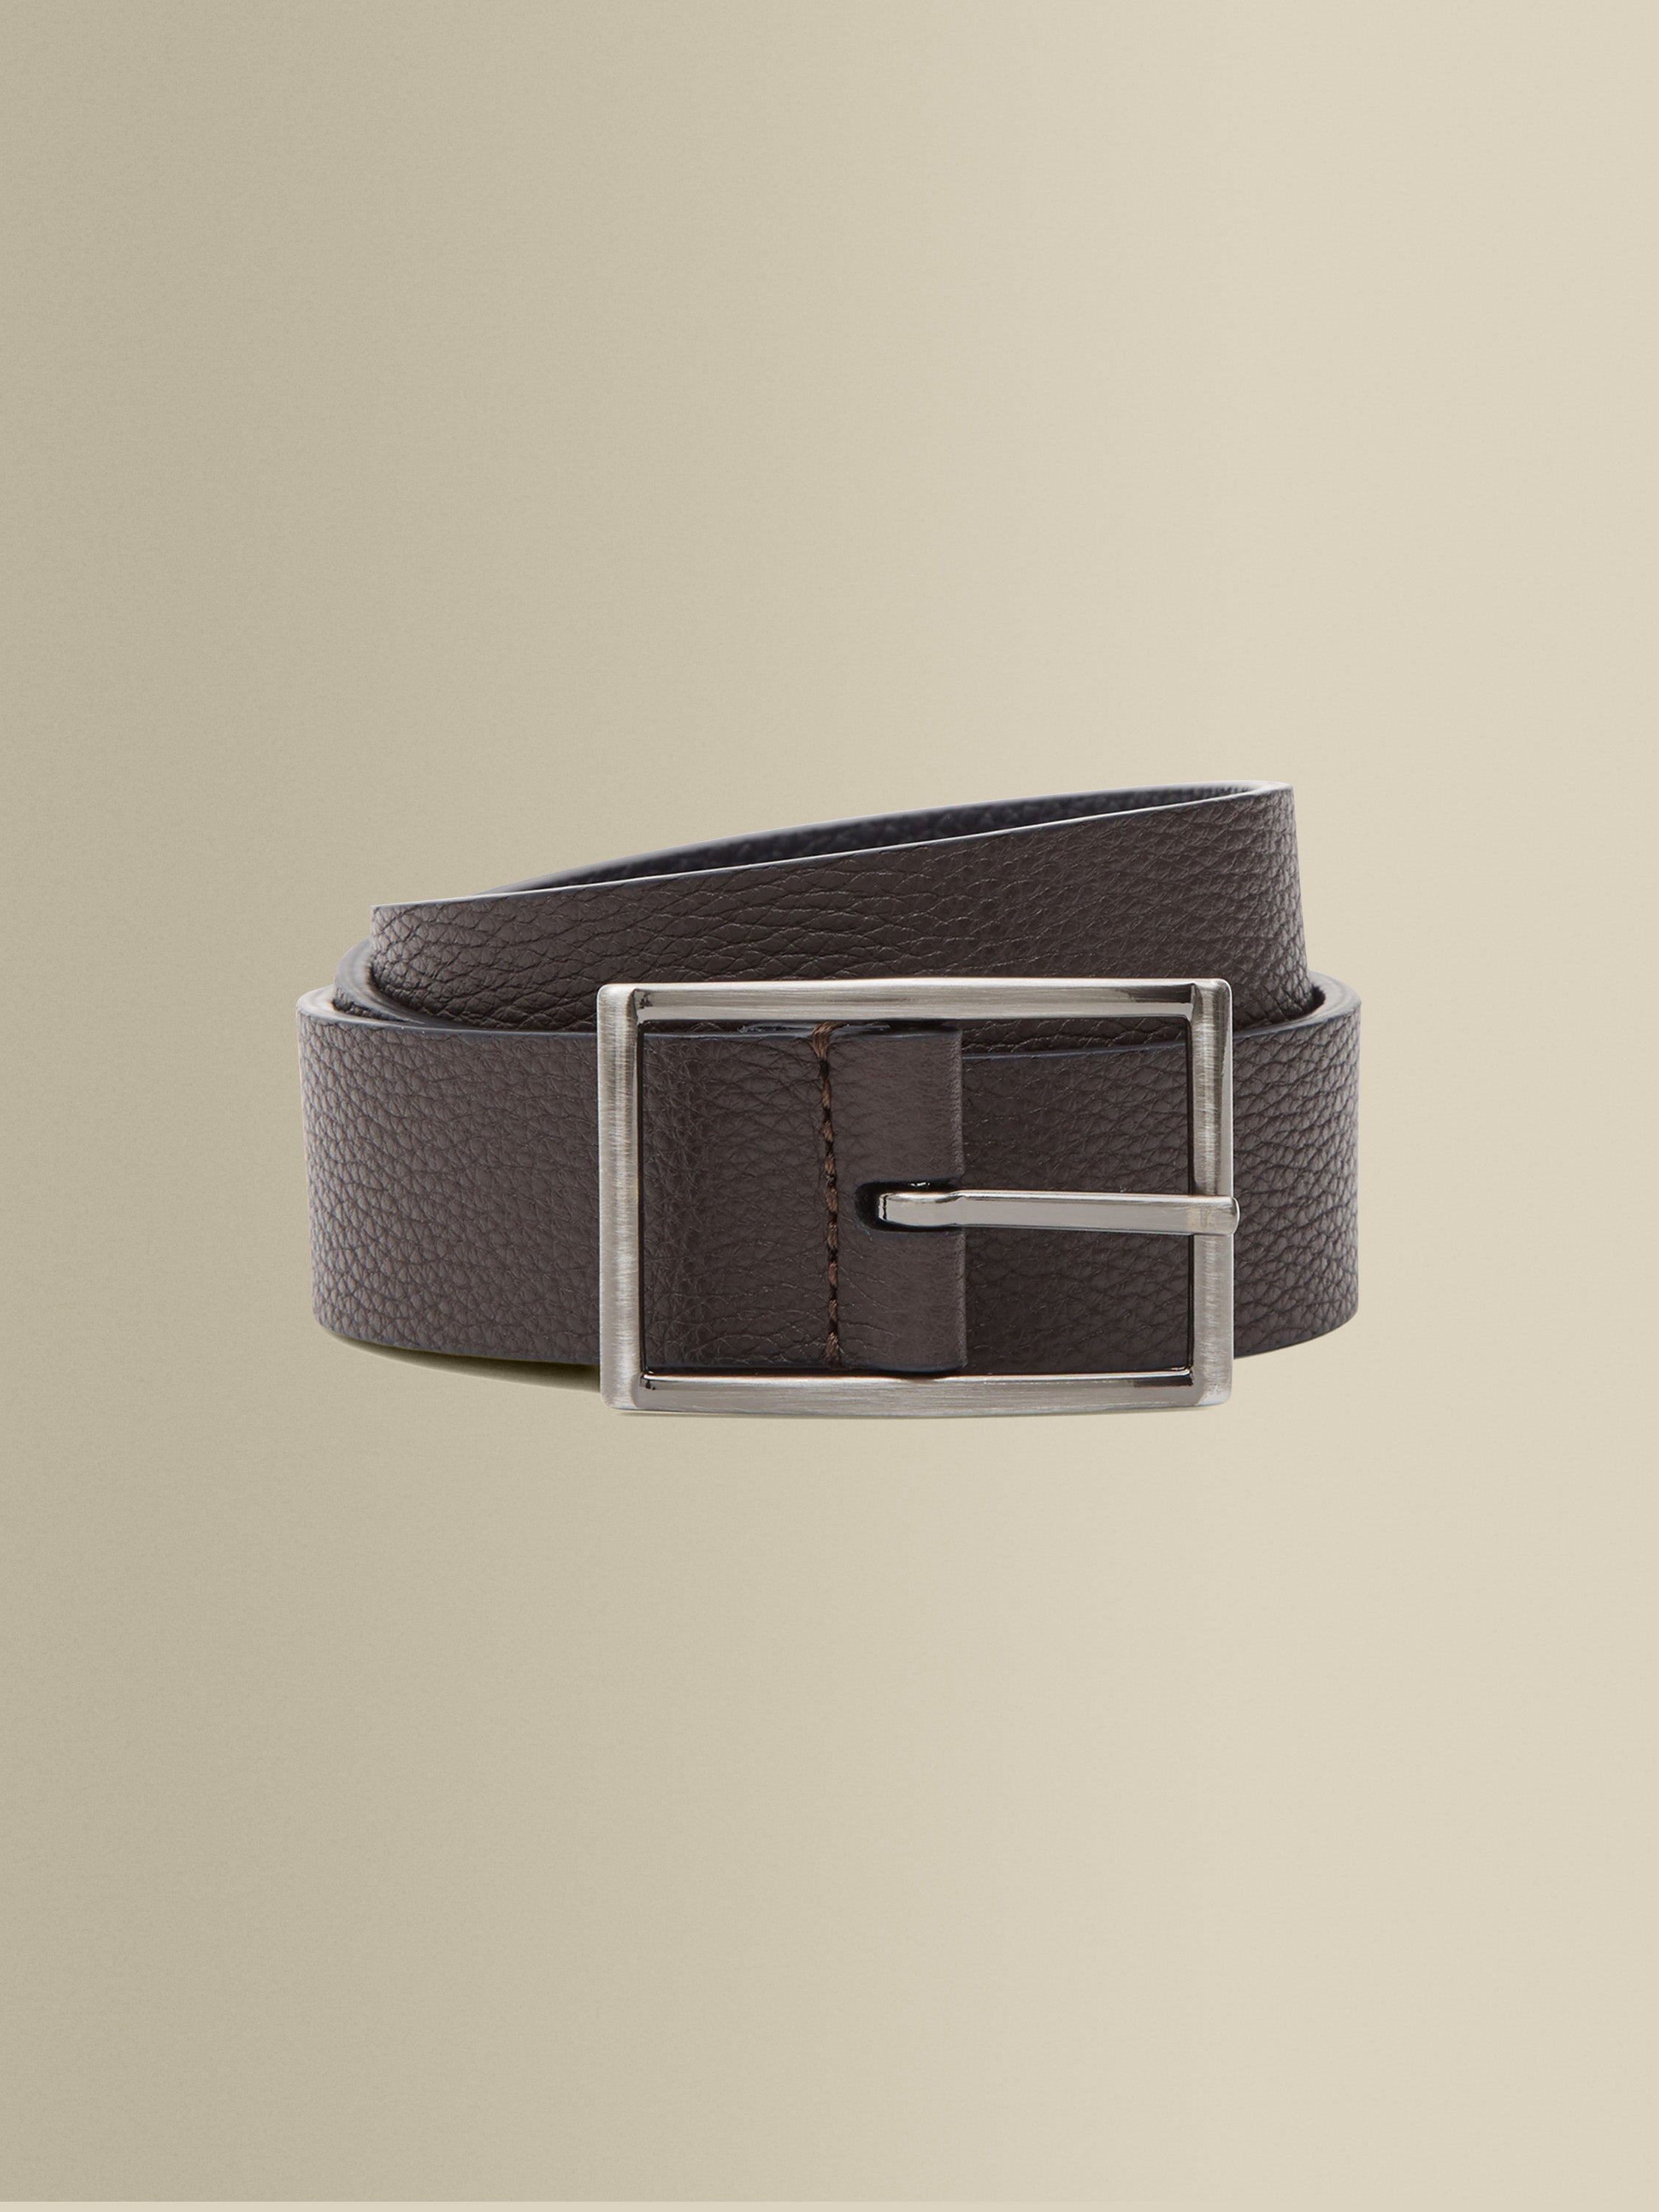 Textured Leather Reversible Belt Navy Brown Product Main